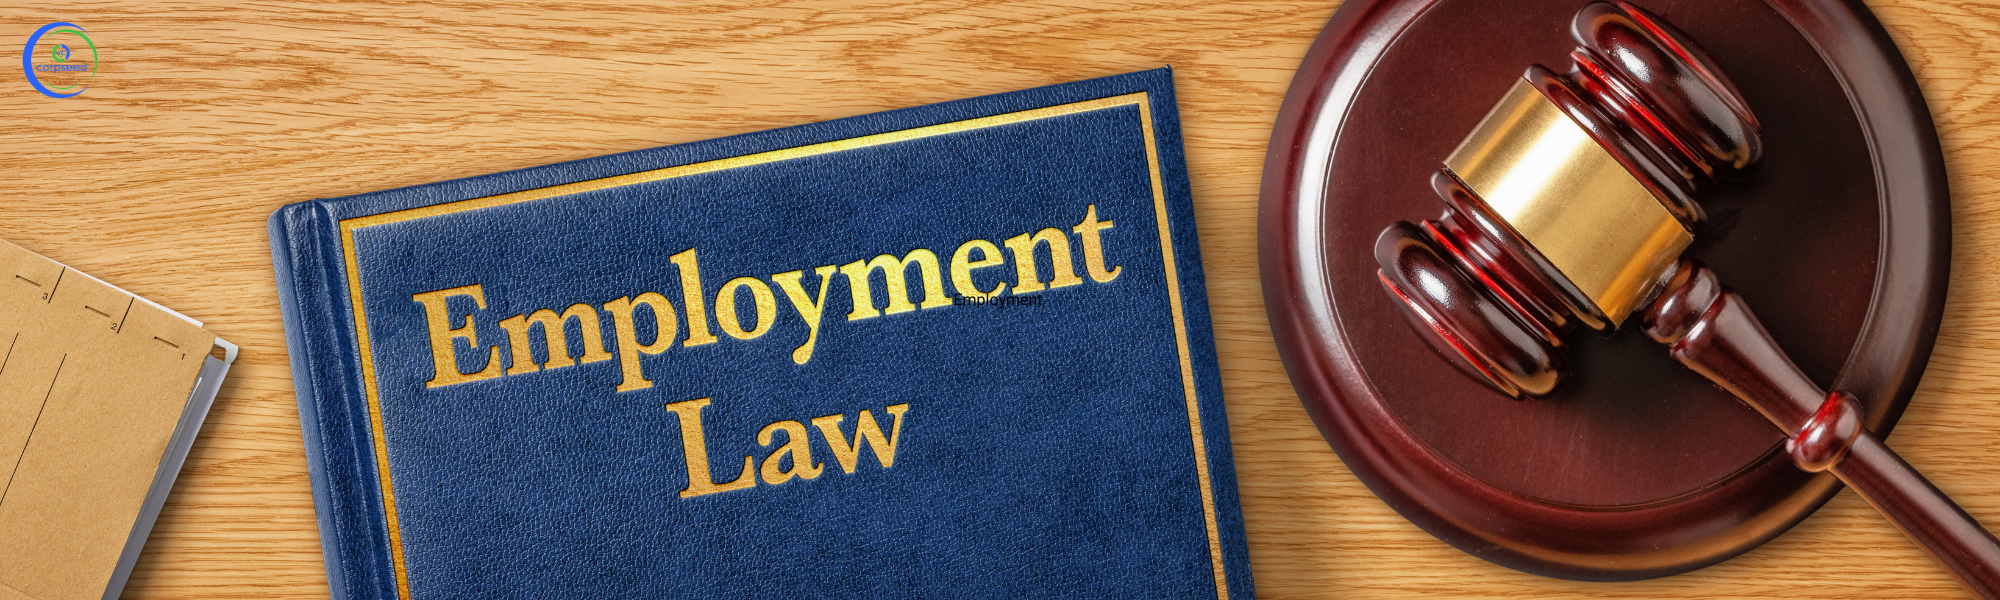 Employment Law Corpseed